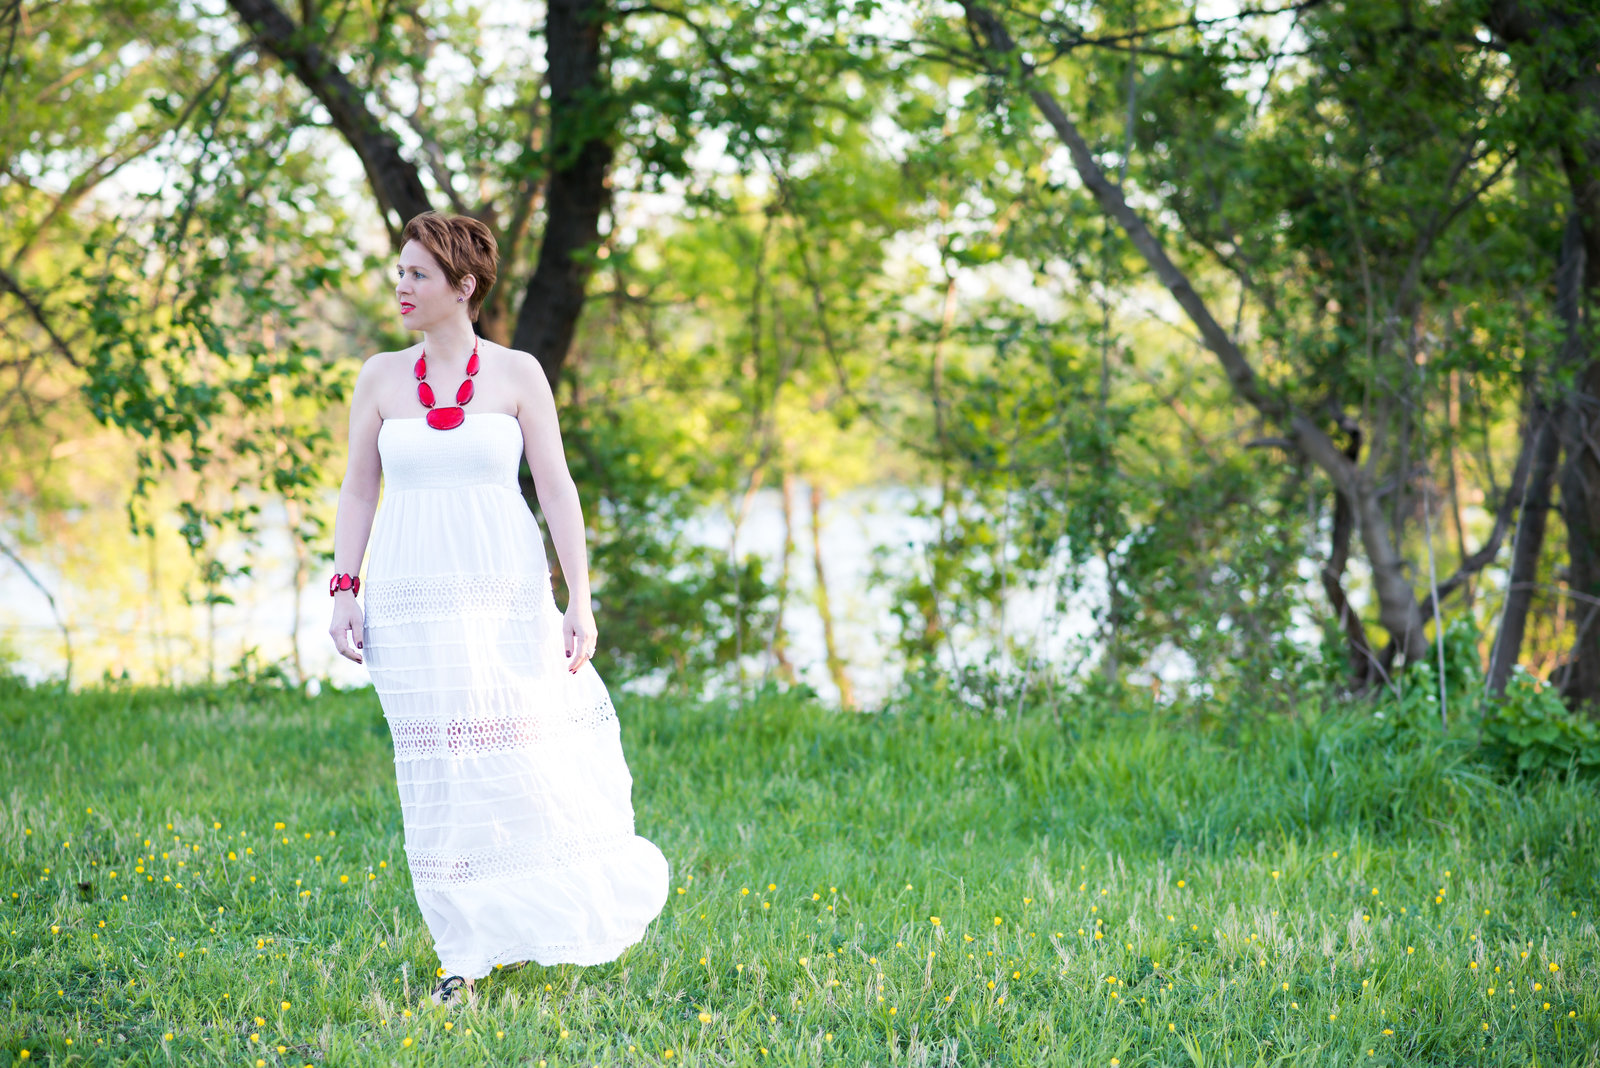 Stunning portrait photography in Richmond of a  women in white dress